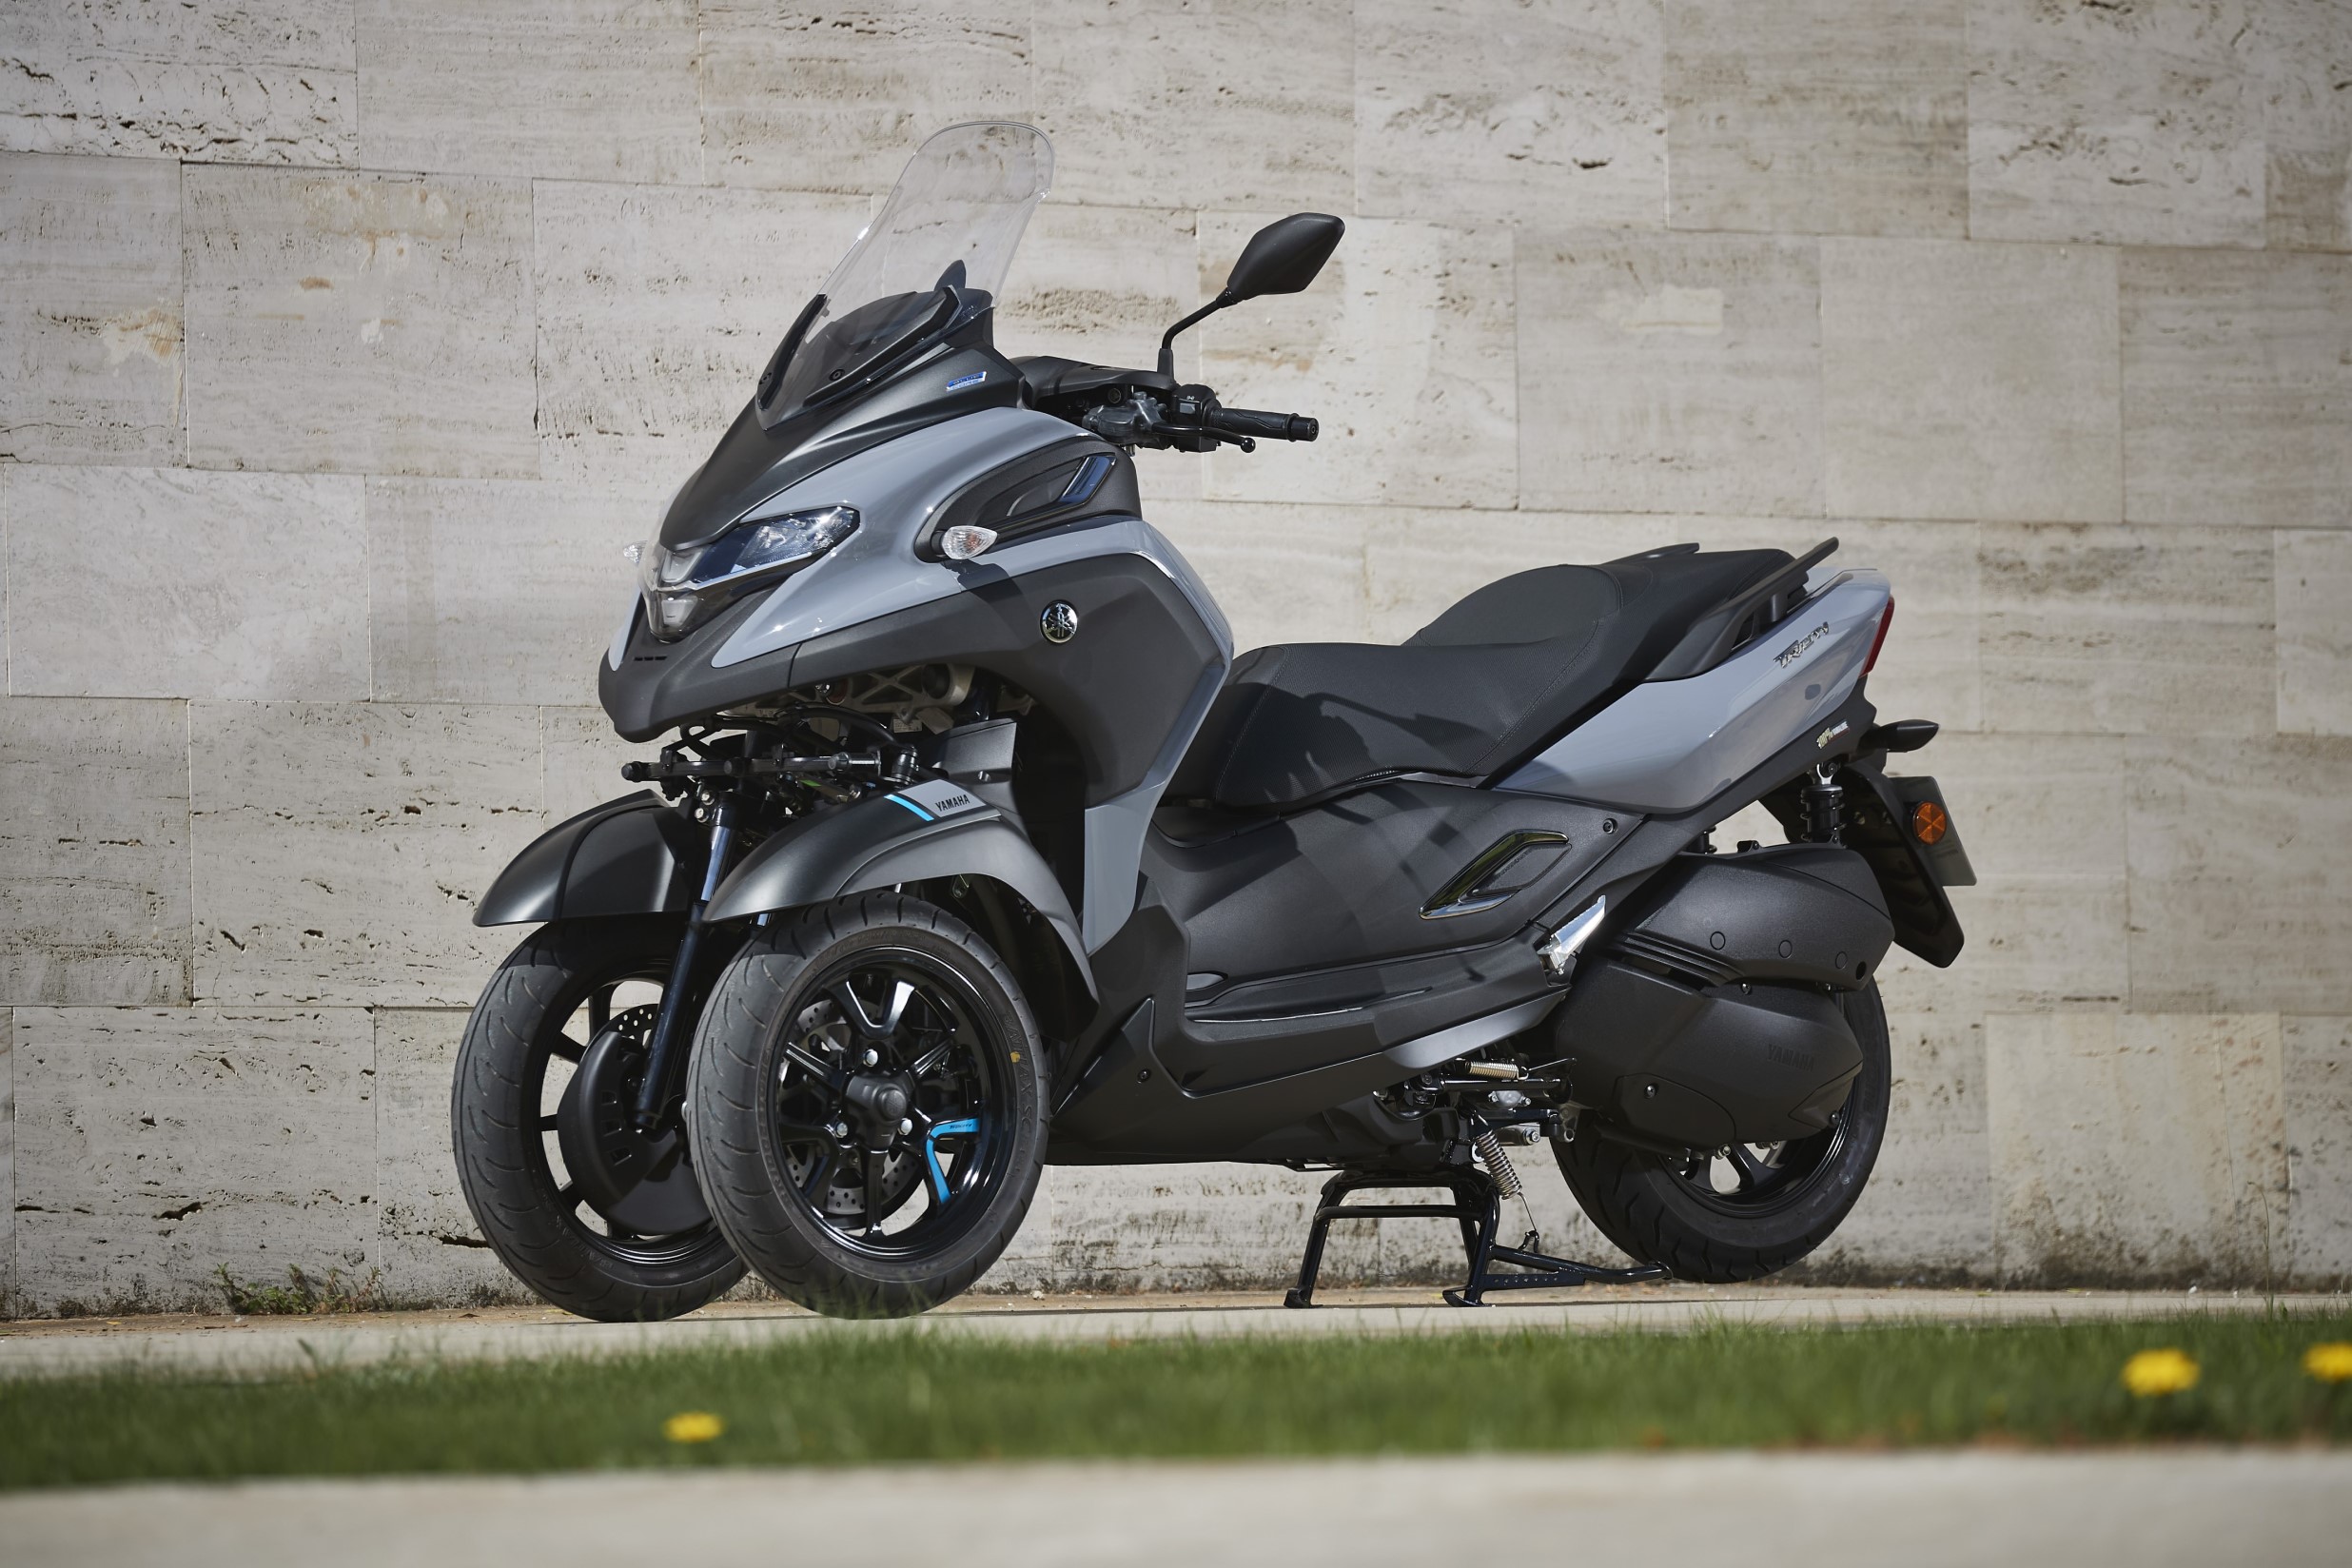 Yamaha Tricity 300: Three wheels Motorcycles for city and highway